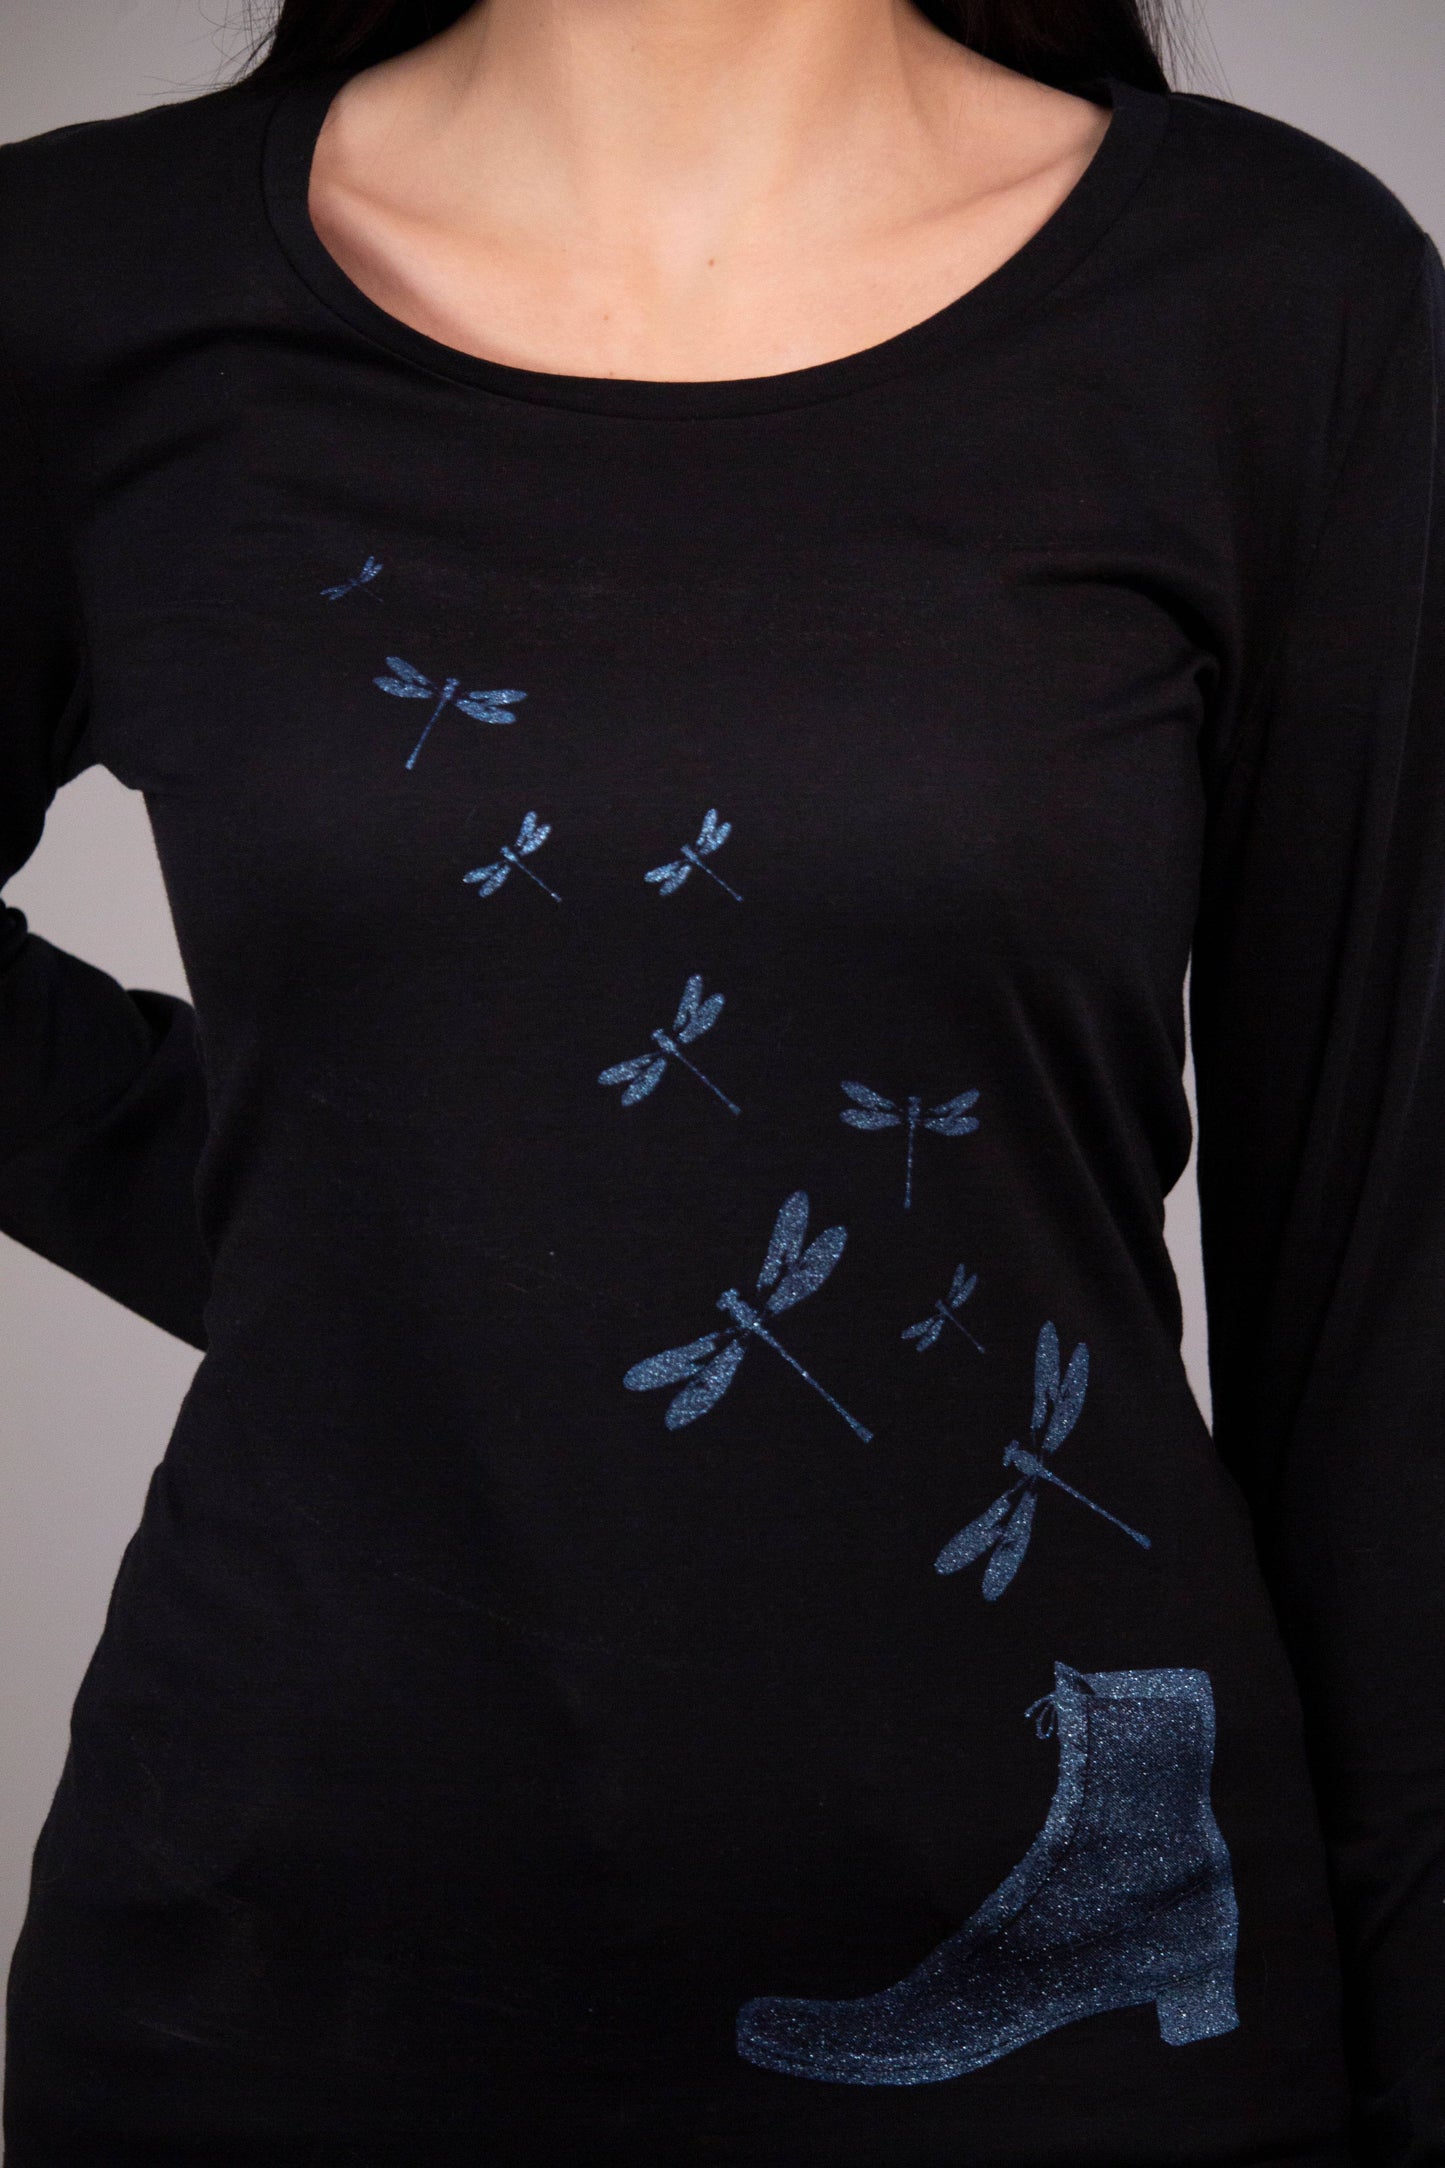 Shiny blue dragonflies fly out of boot women's tee